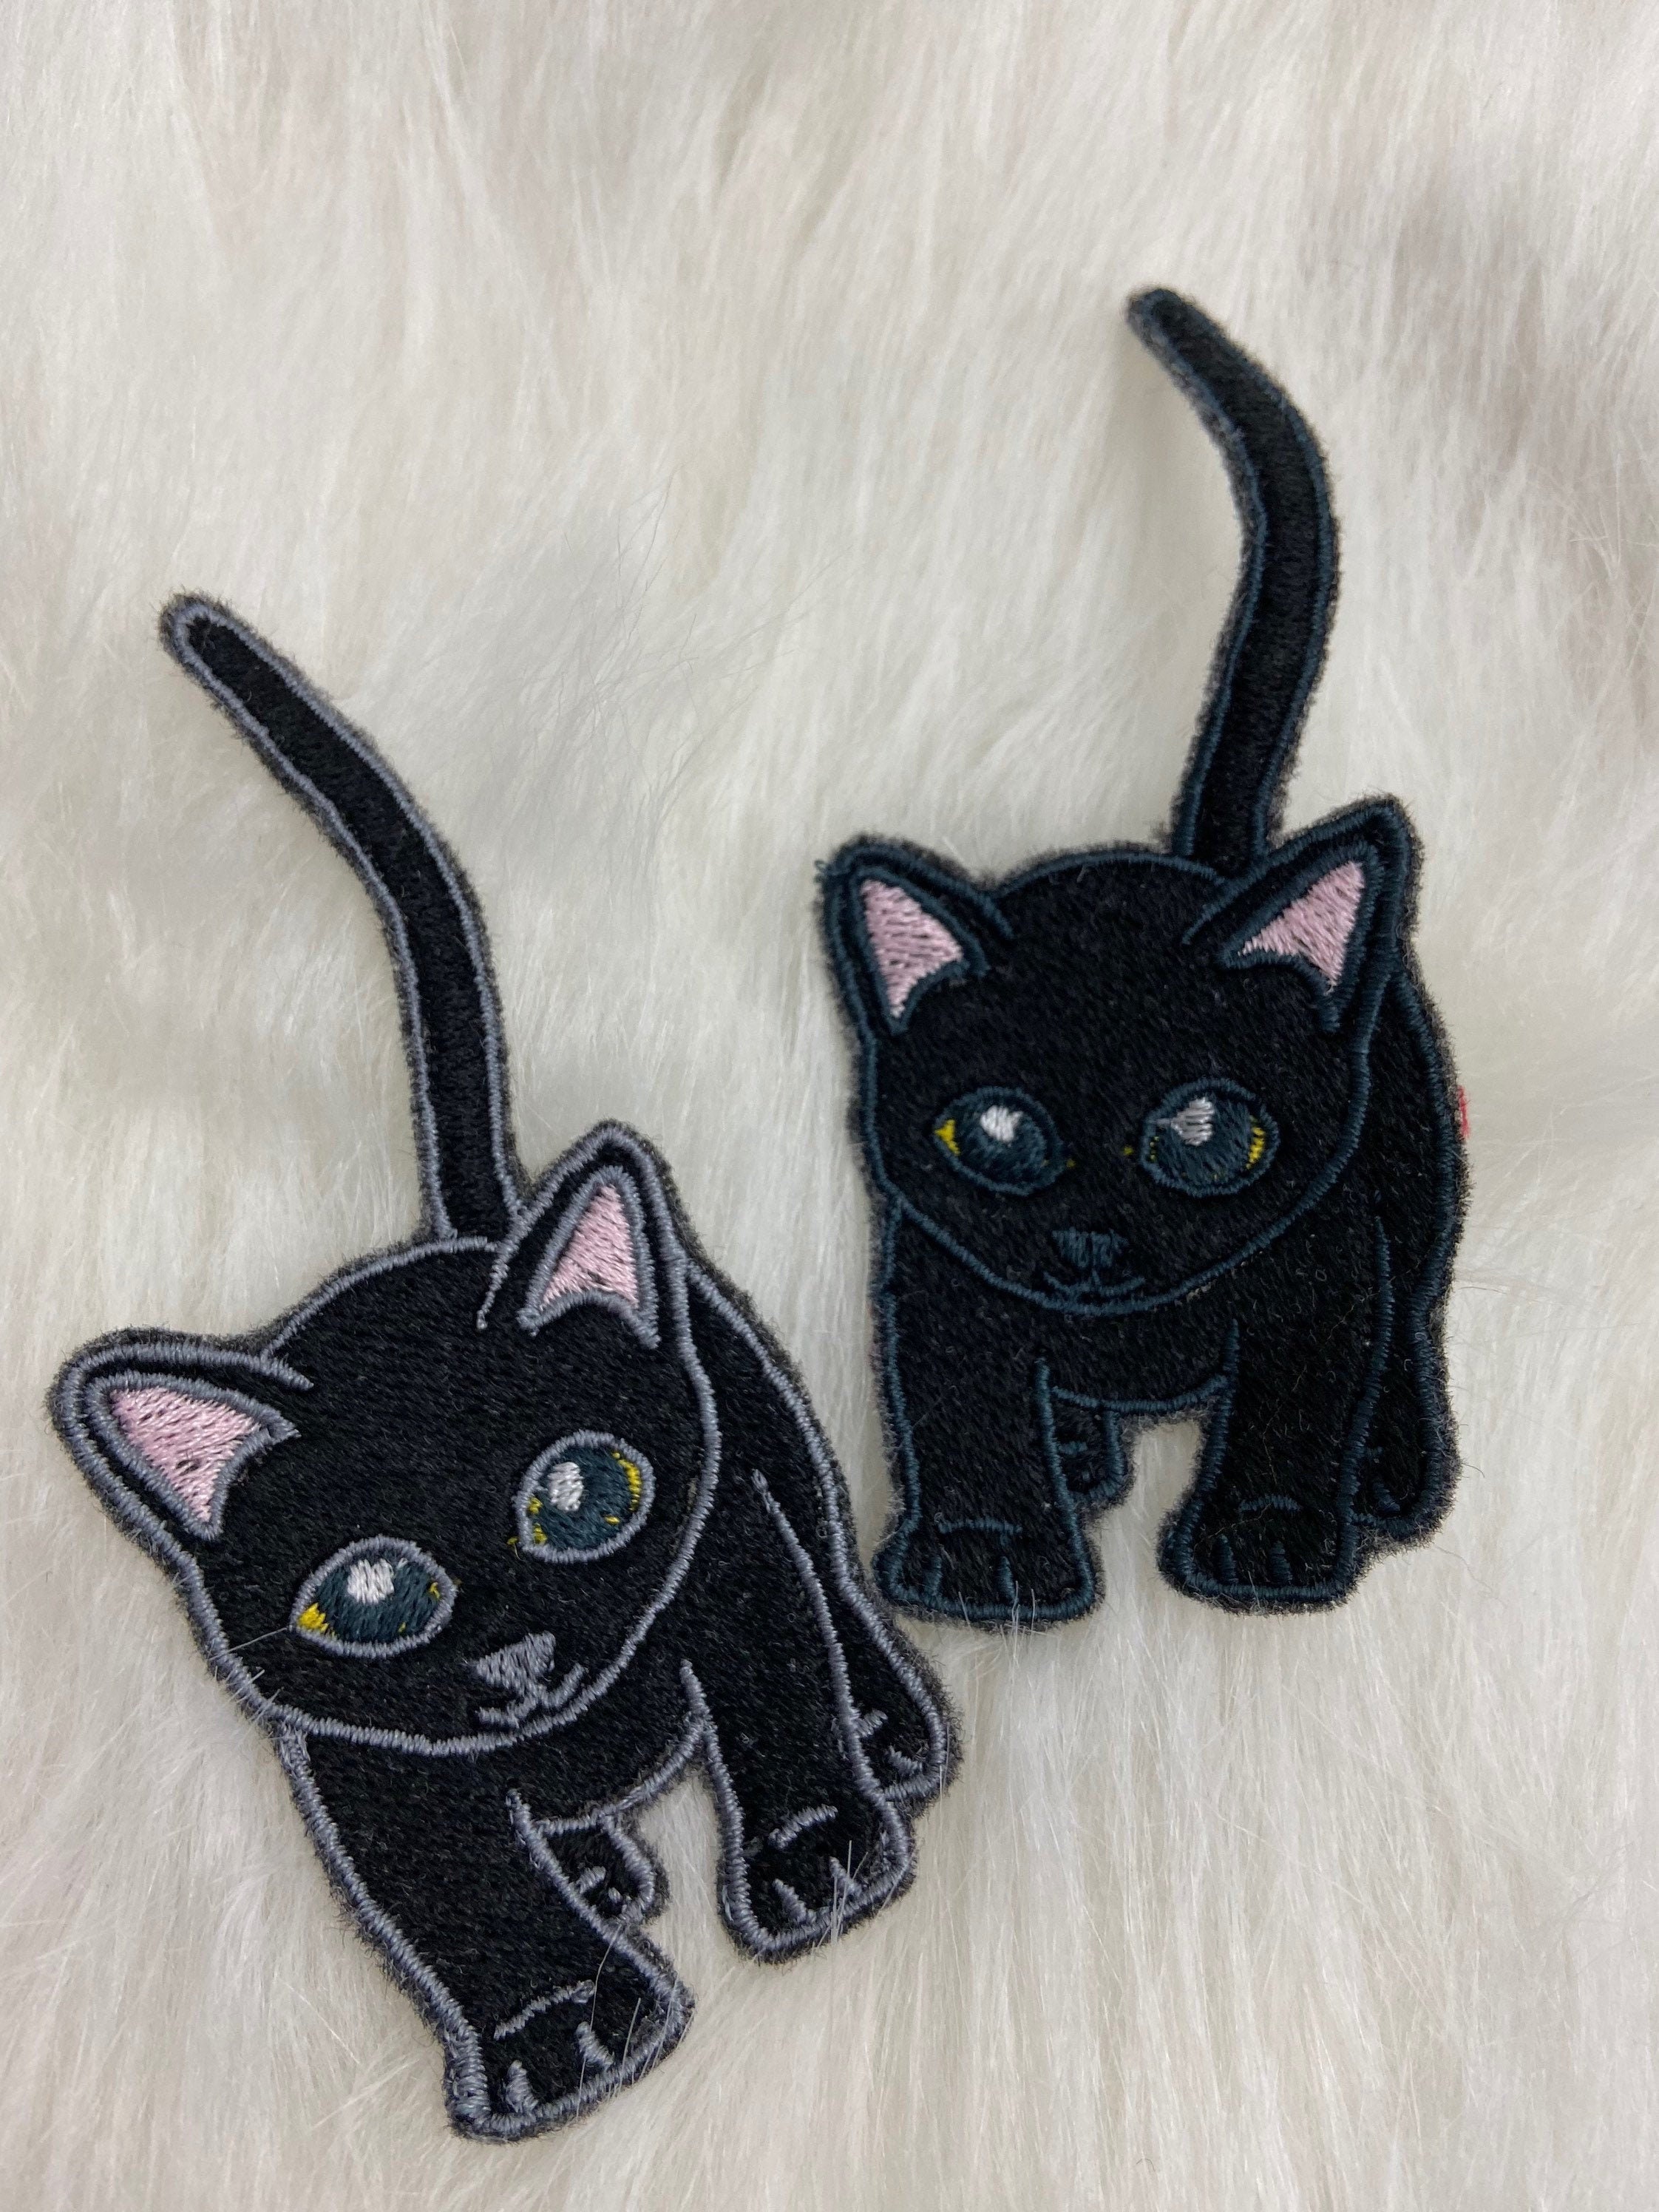 Ew People - Peeking Black Cat Patch - Black Patch For T-shirt - Bag  accessories - Patches for Jackets - Full Embroidery Iron On Patch 41412 in  online supermarket